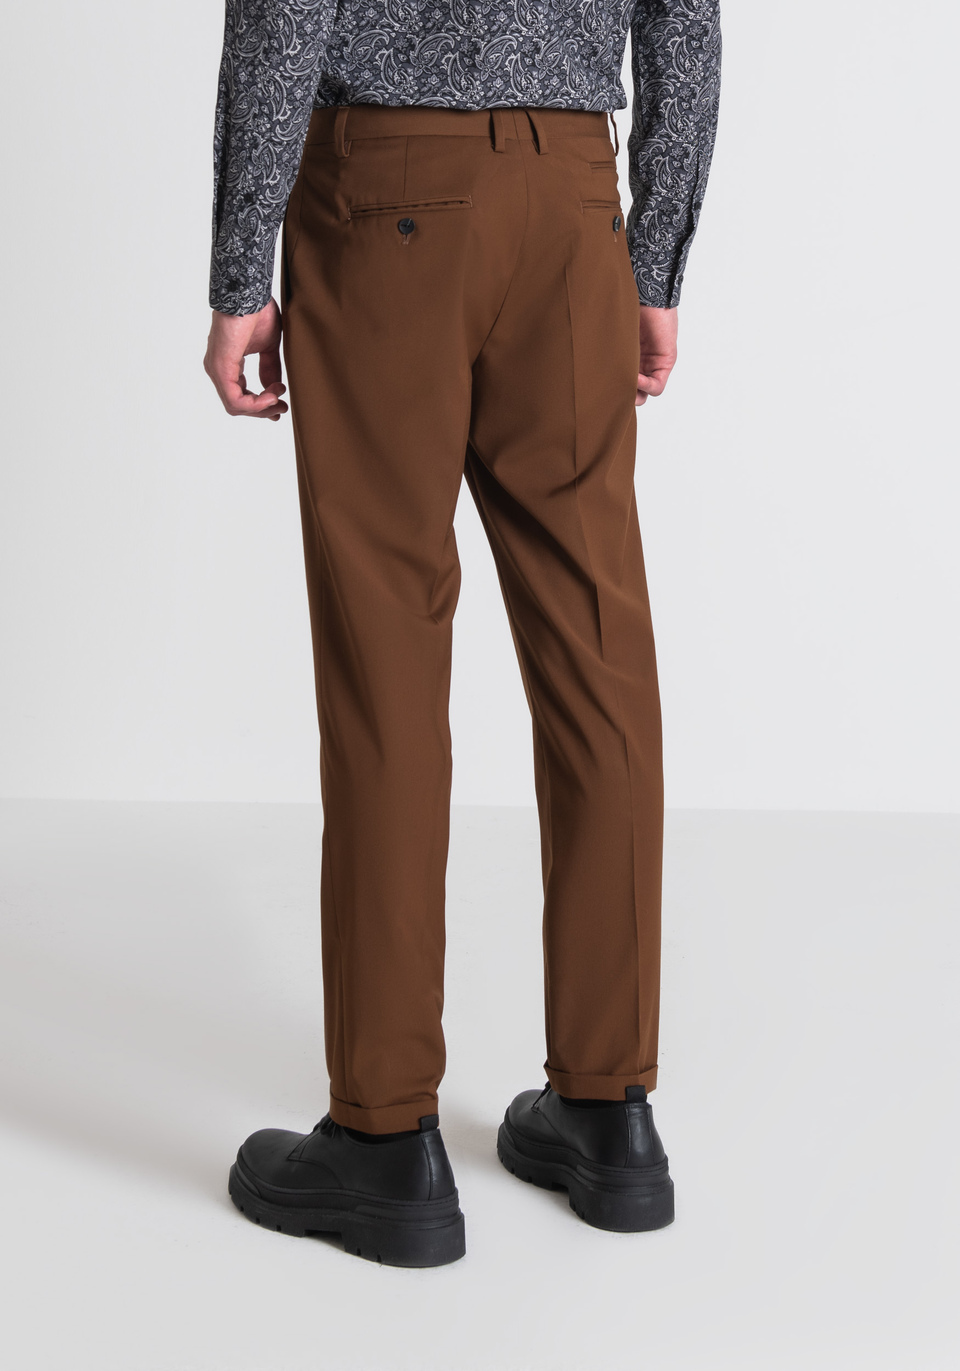 "RAMONES" SLIM FIT TROUSERS IN SOFT-TOUCH STRETCH FABRIC - Antony Morato Online Shop